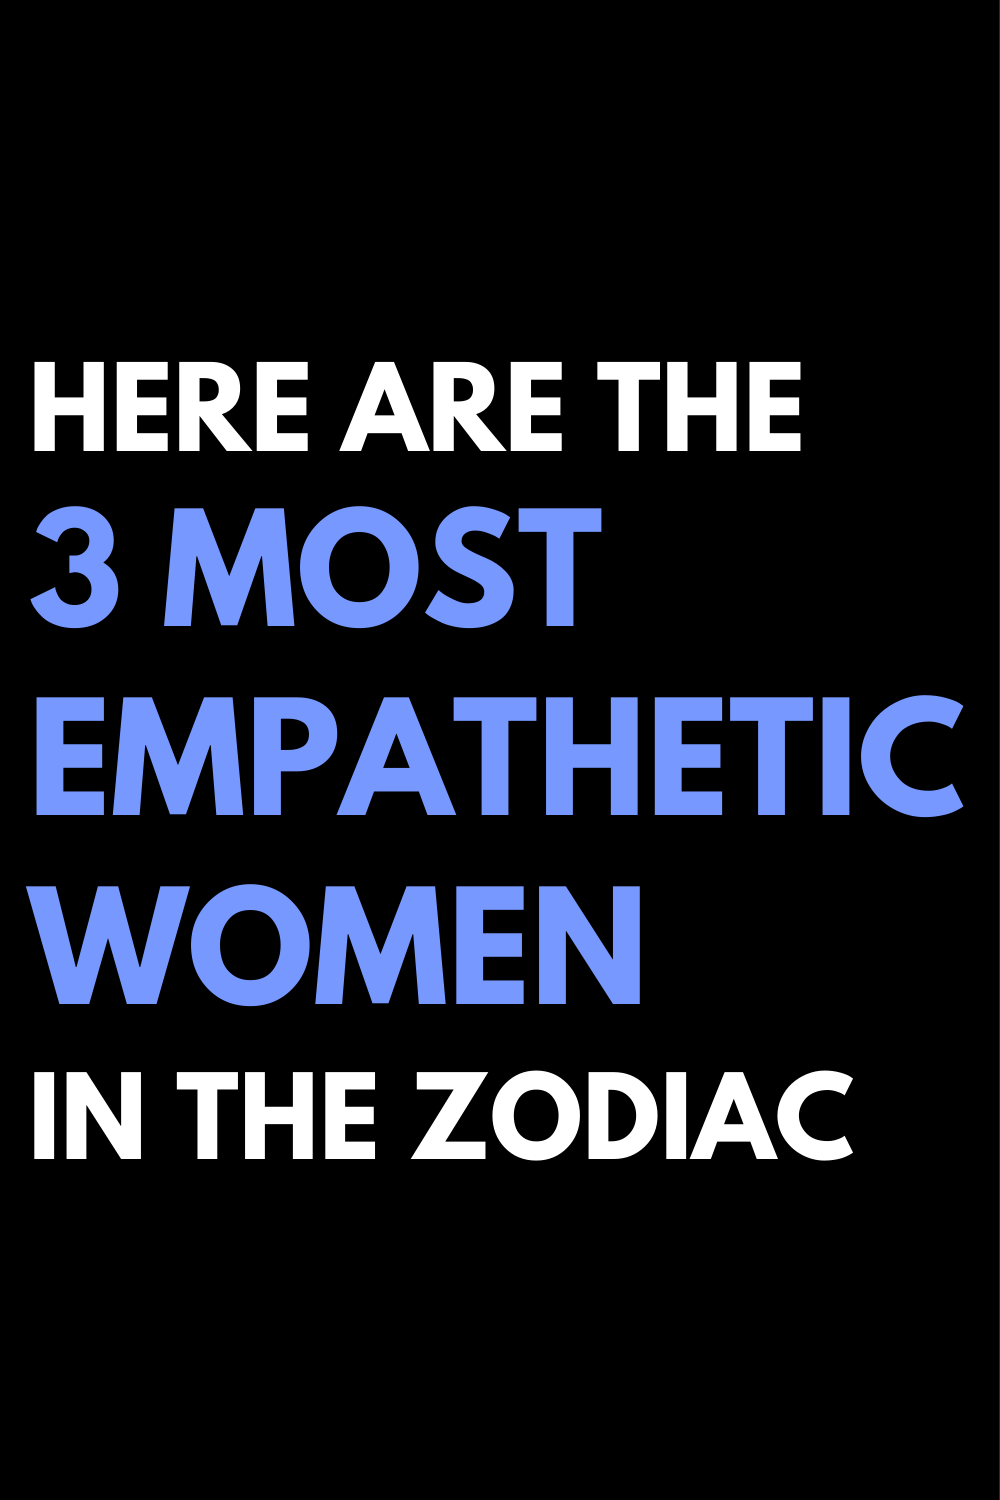 Here are the 3 most empathetic women in the zodiac